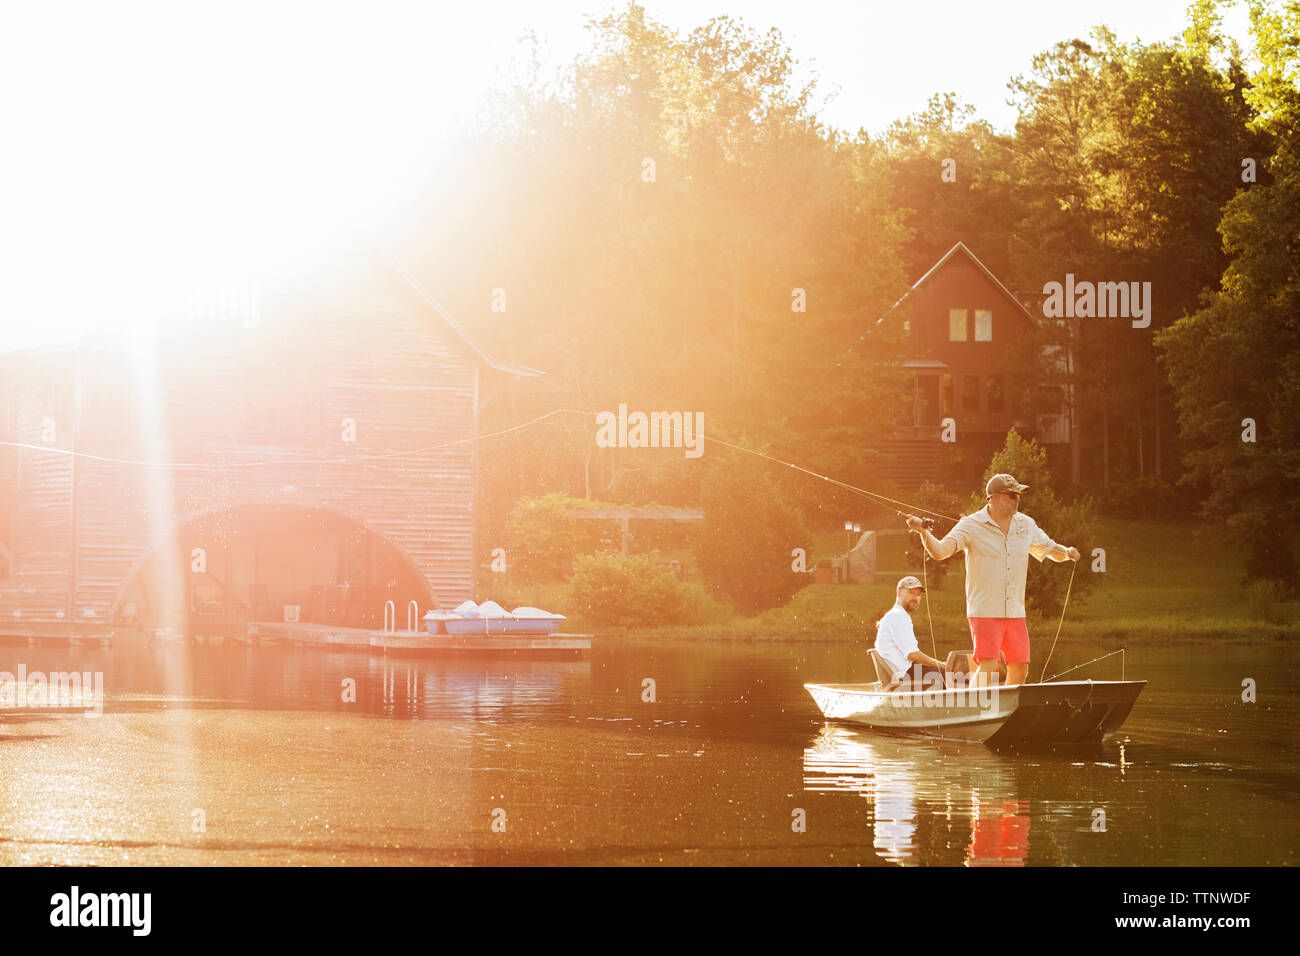 Man casting fishing line in lake with friend sitting in rowboat during sunny day Stock Photo